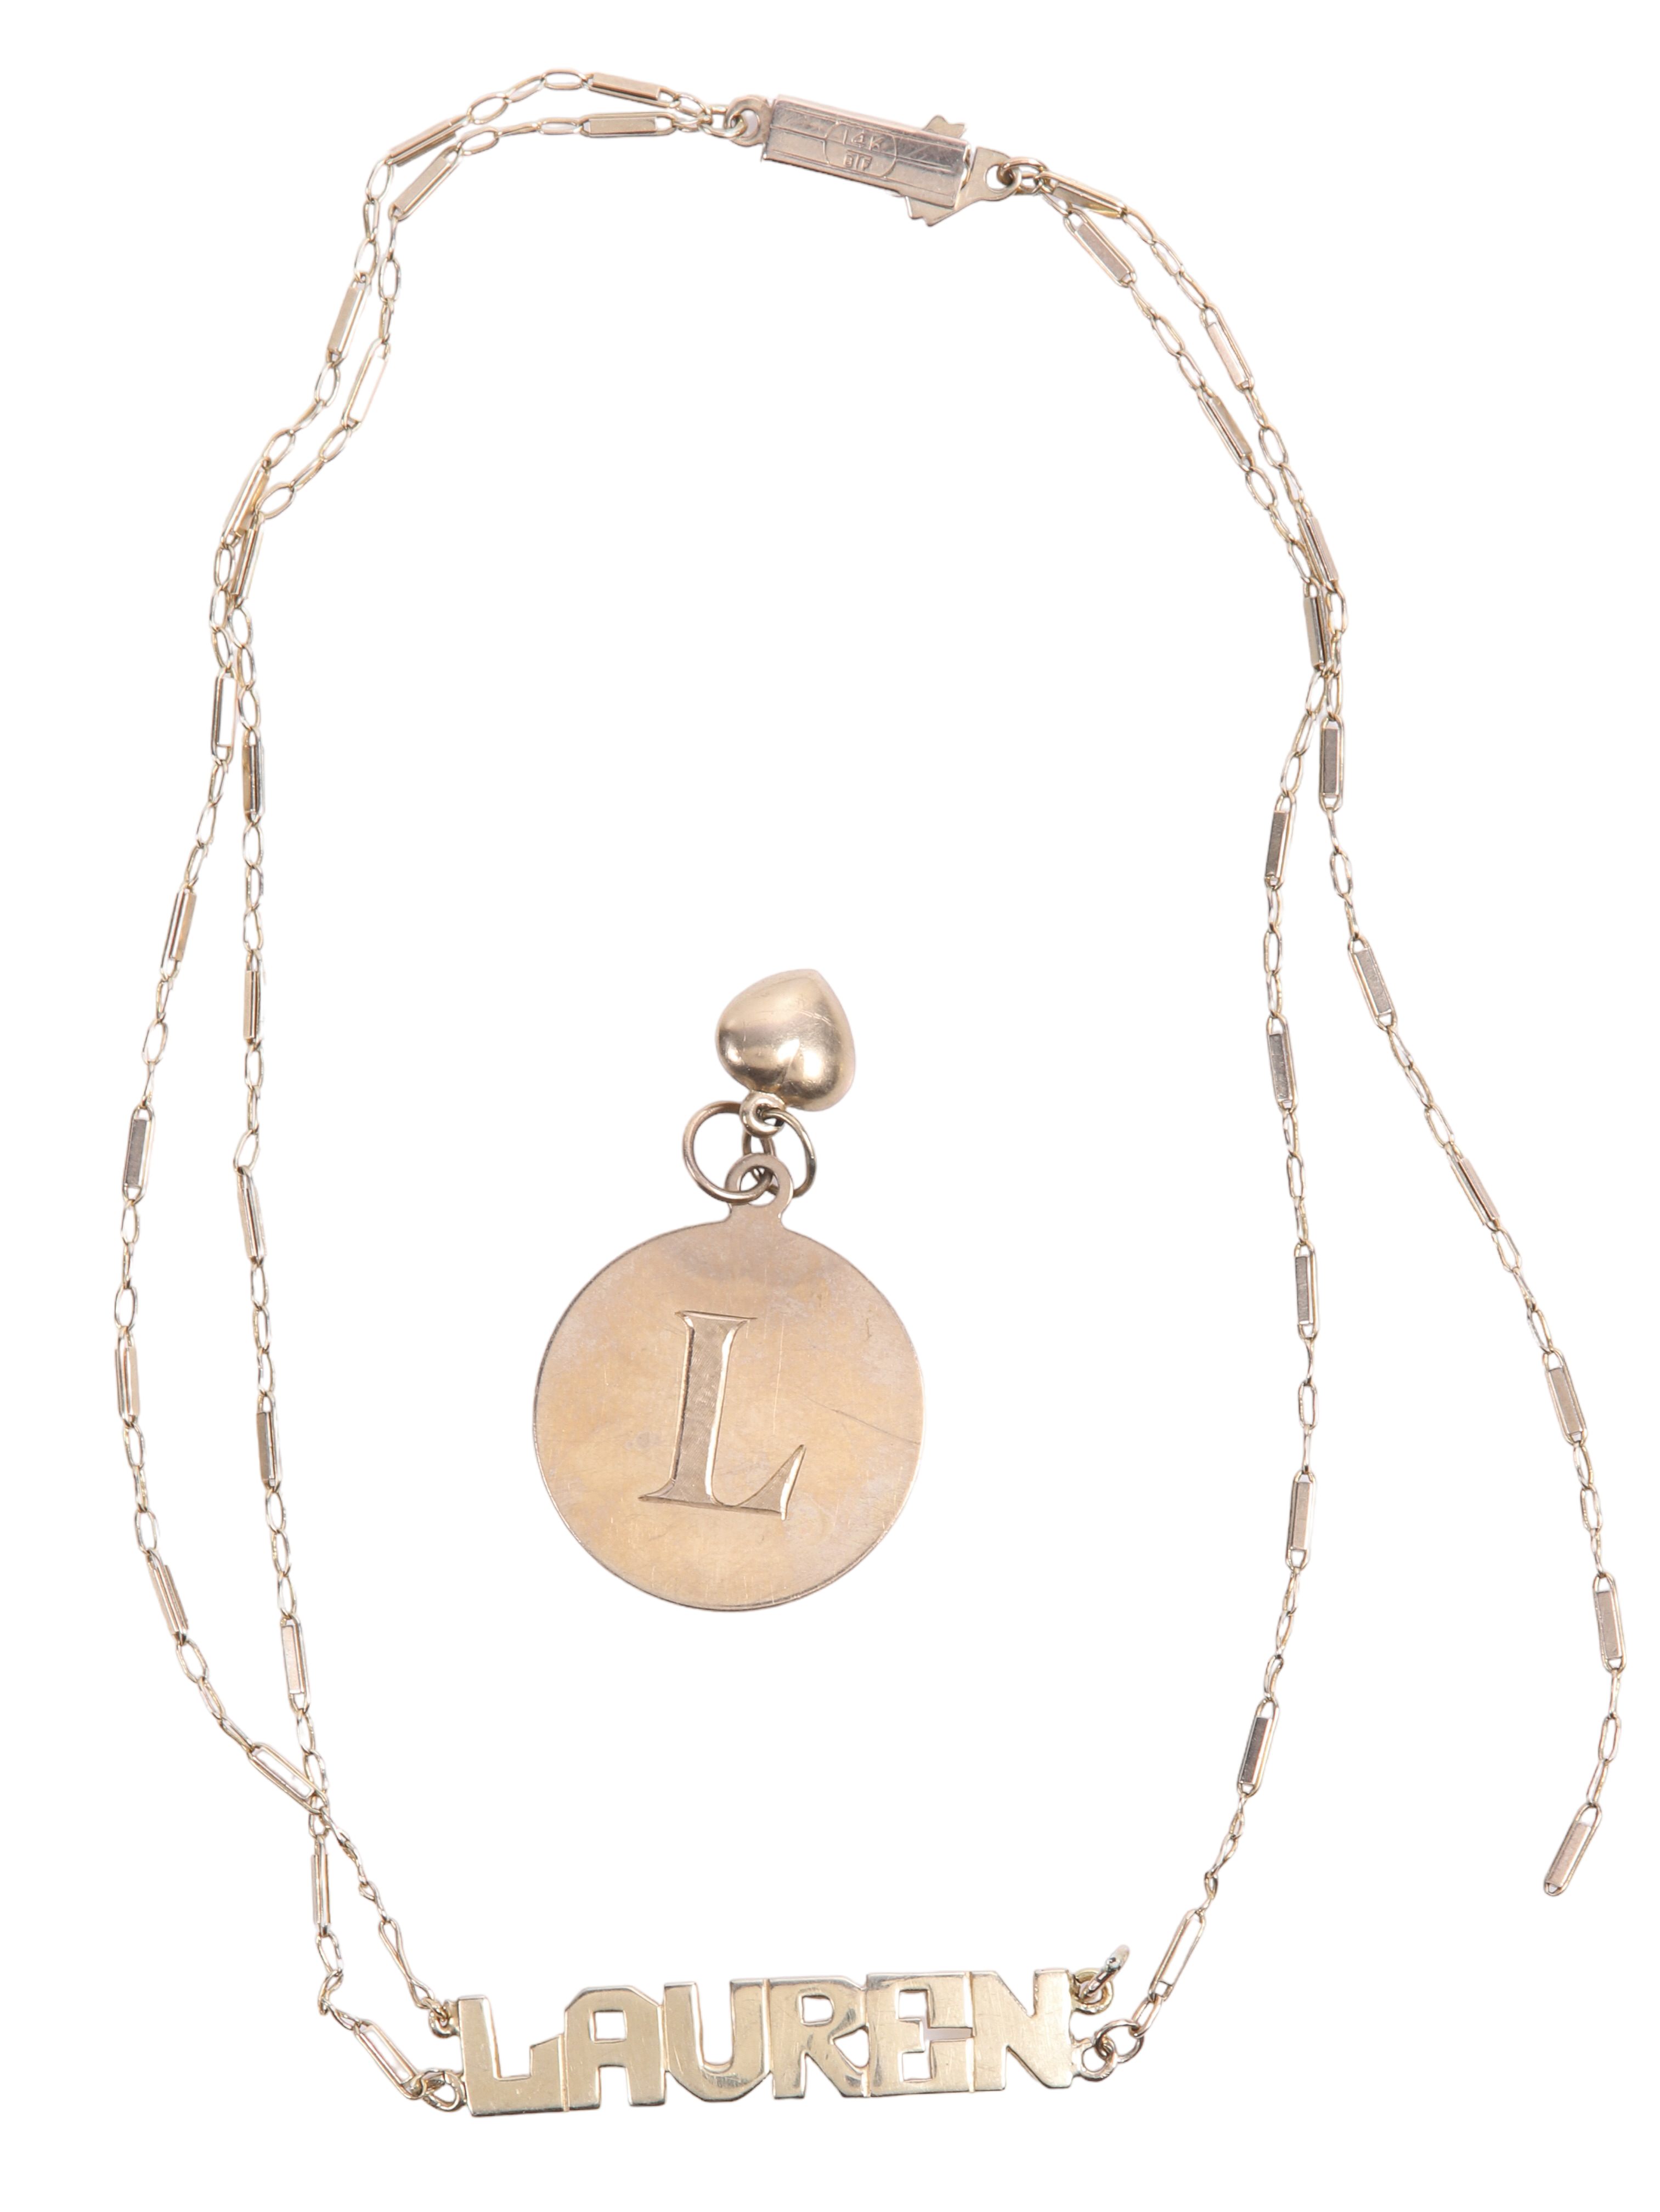 14K Yellow gold necklace and charm